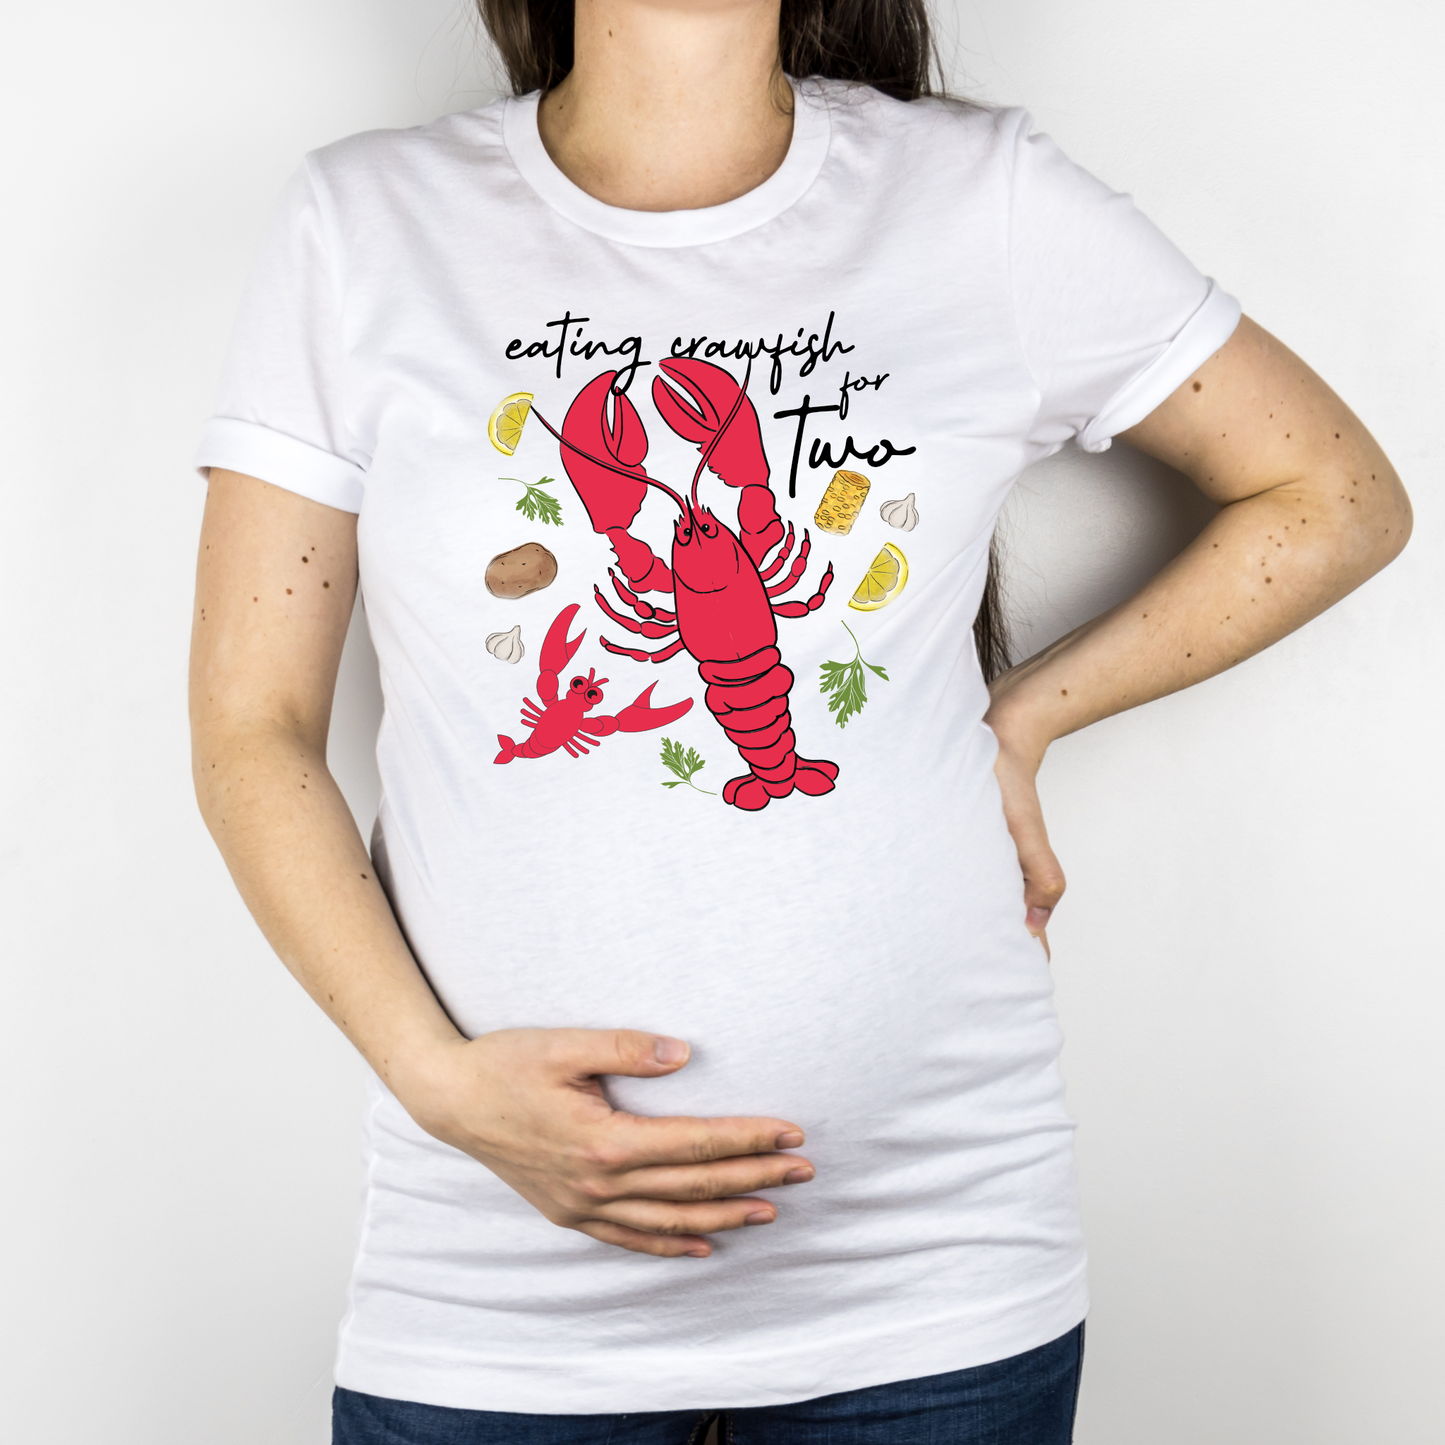 Eating Crawfish for Two| Maternity